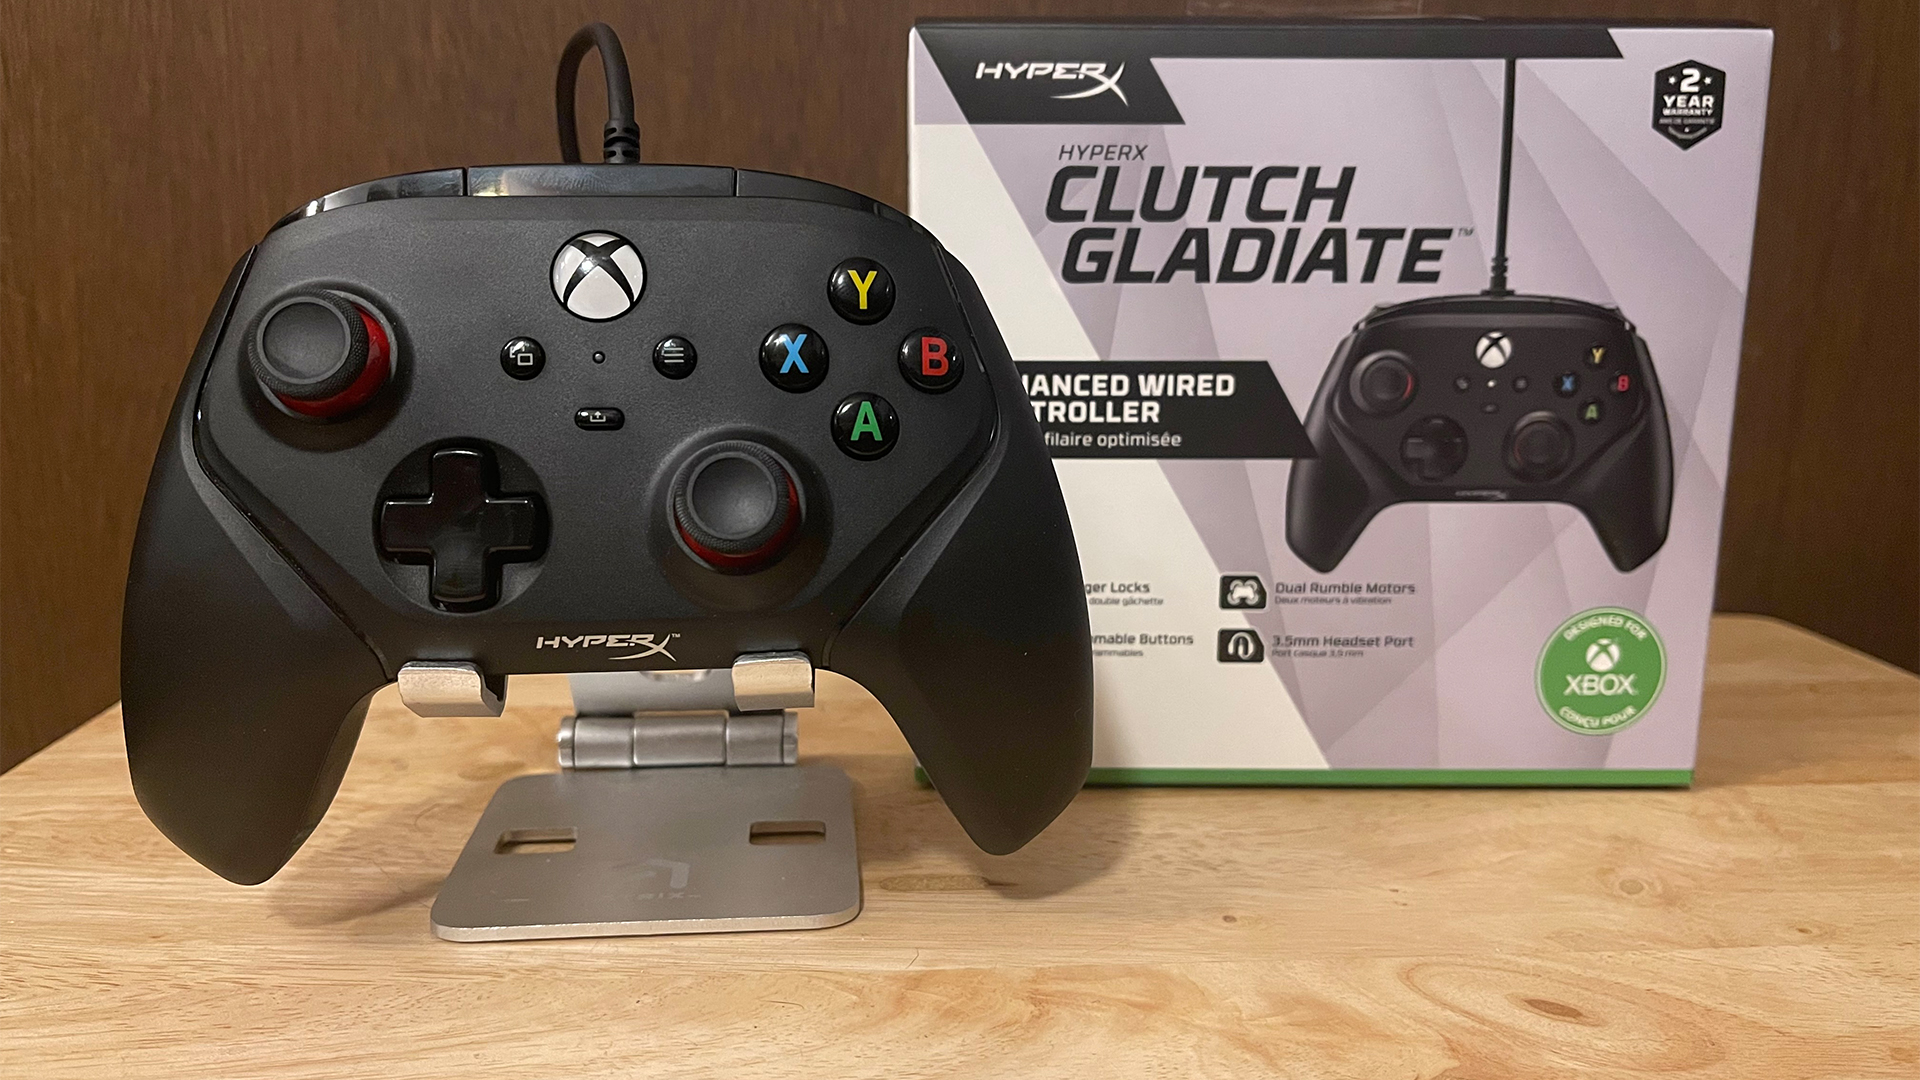 HyperX Clutch Gladiate Controller Review - Clutch performance that ...